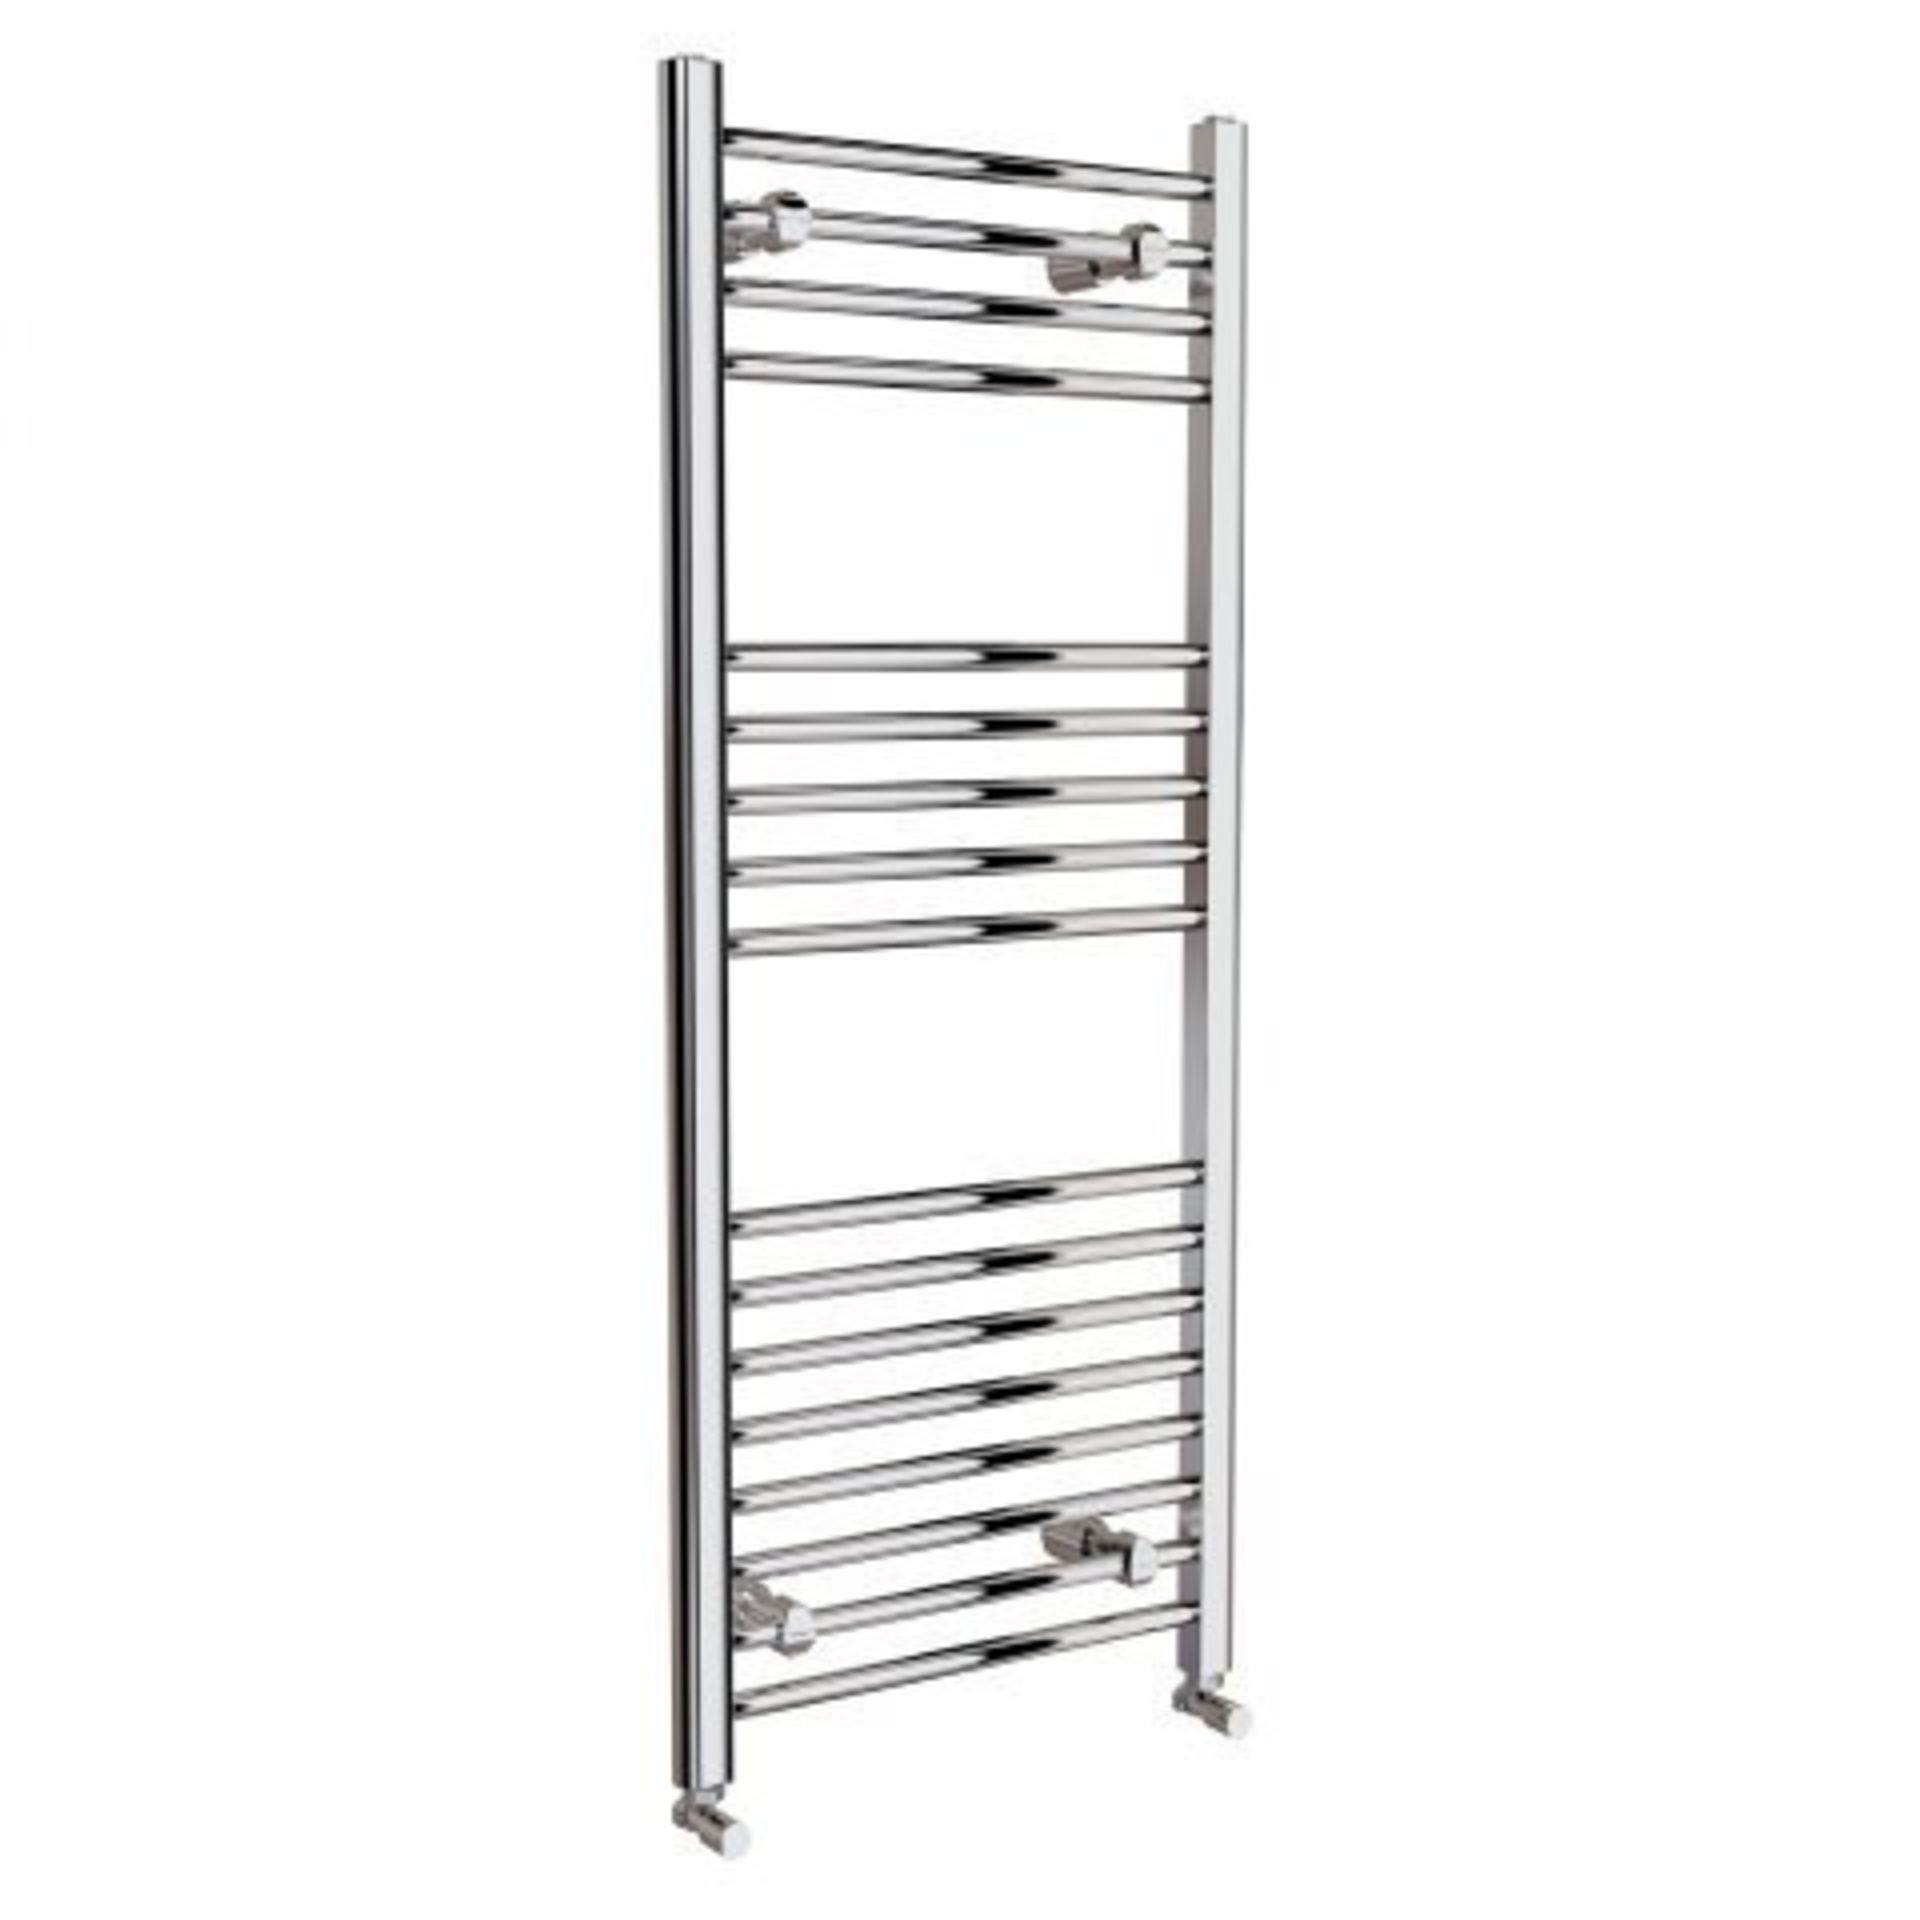 BRAND NEW BOXED 1200x450mm - 20mm Tubes - Chrome Heated Straight Rail Ladder Towel Radiator - - Image 2 of 2